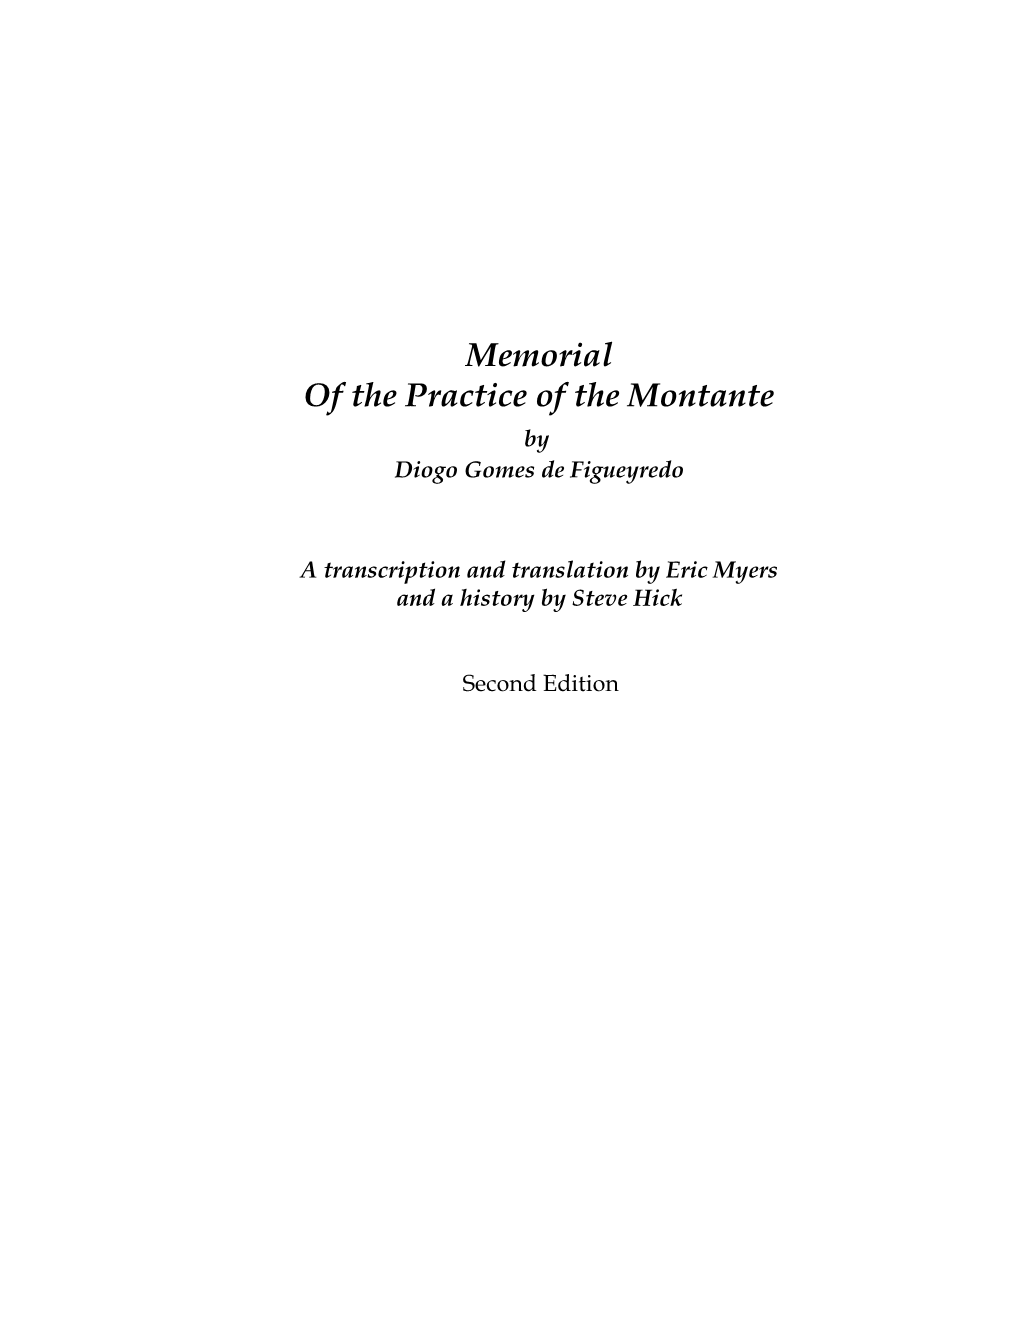 Memorial of the Practice of the Montante by Diogo Gomes De Figueyredo